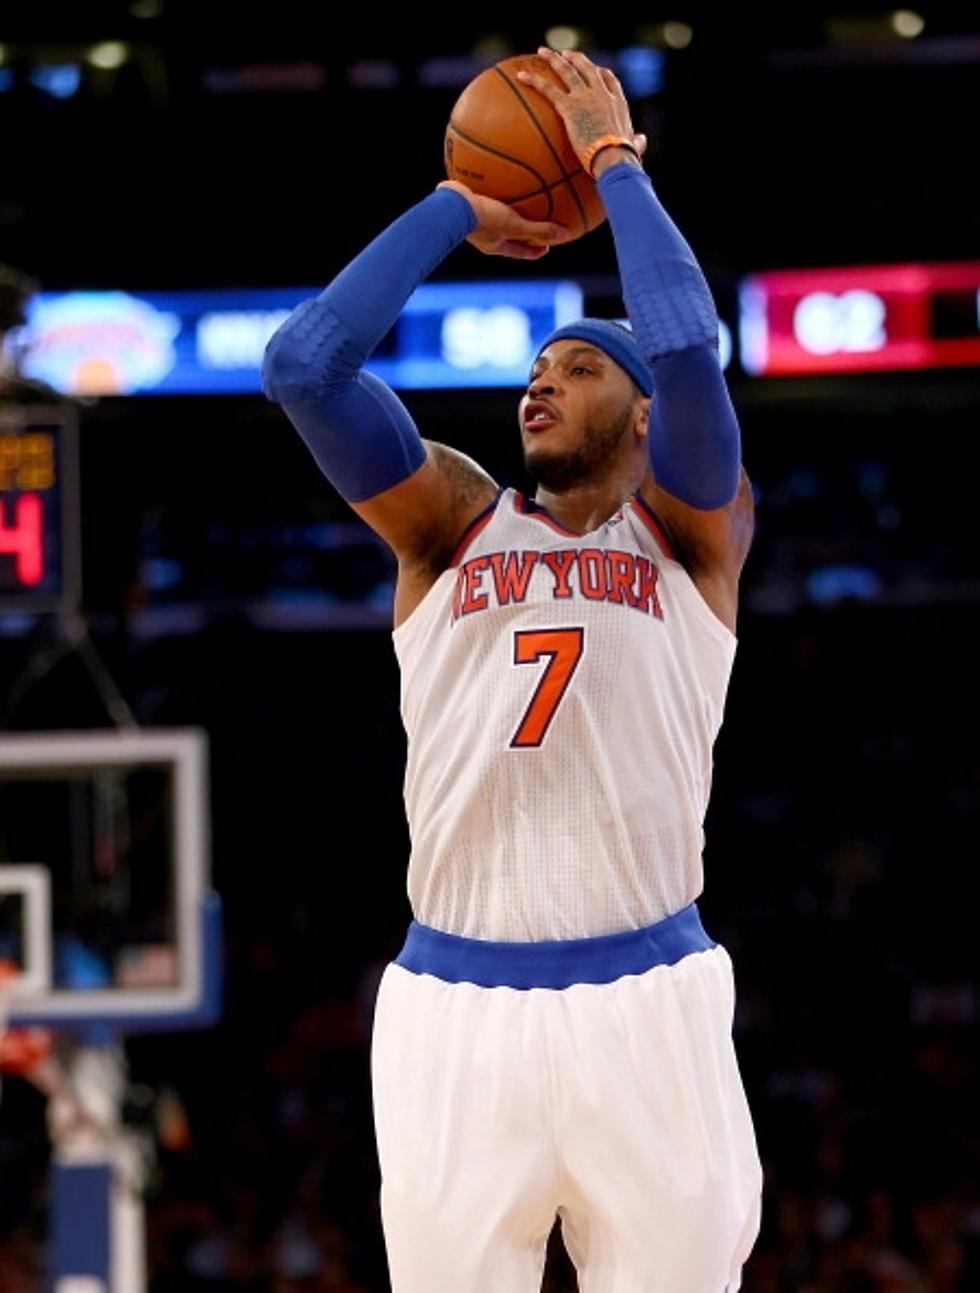 Check Out The Carmelo Anthony Bobblehead [PHOTO]